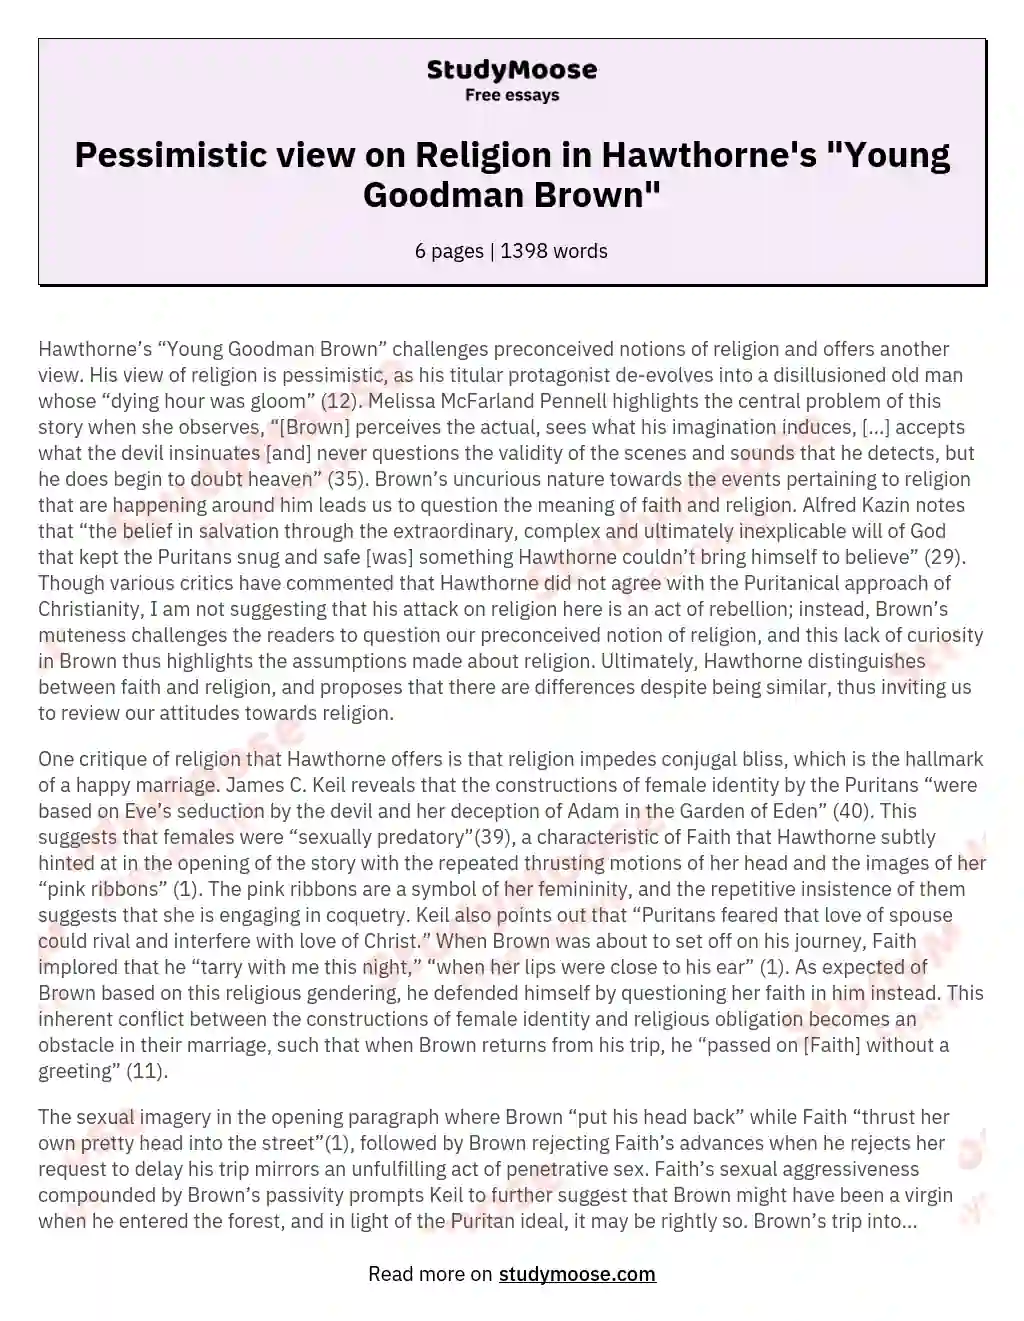 Pessimistic view on Religion in Hawthorne's "Young Goodman Brown" essay